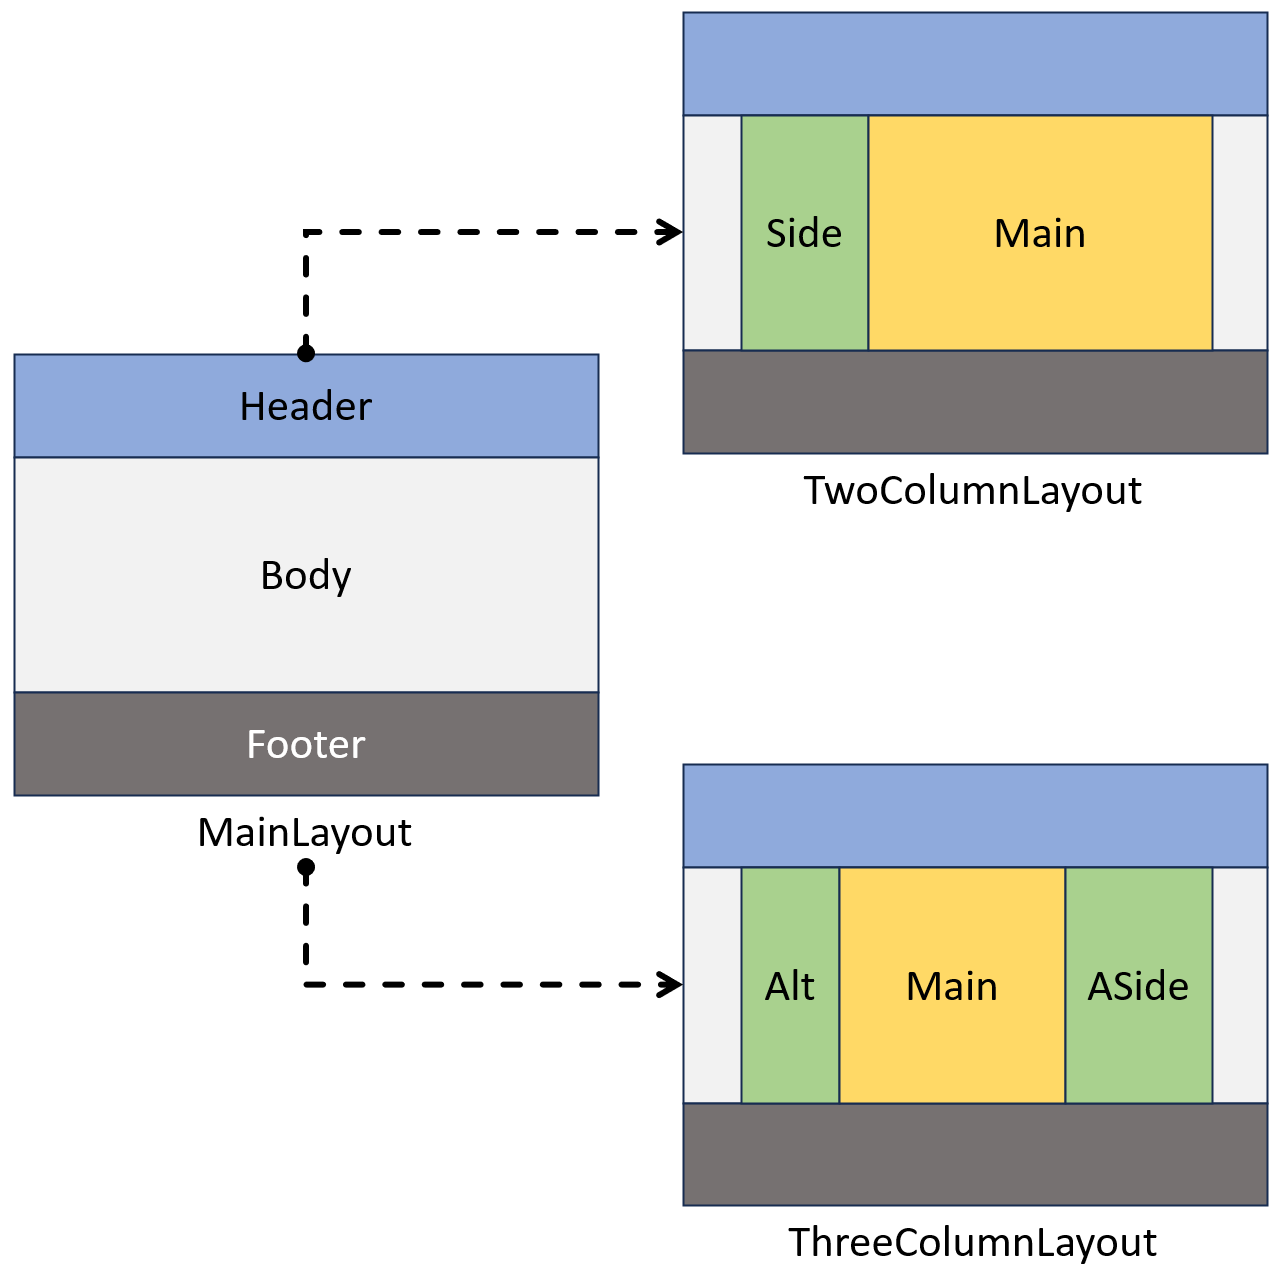 A diagram showing a MainLayout, TwoColumn layout, and ThreeColumn layout. The MainLayout serves as a base for the two layouts.